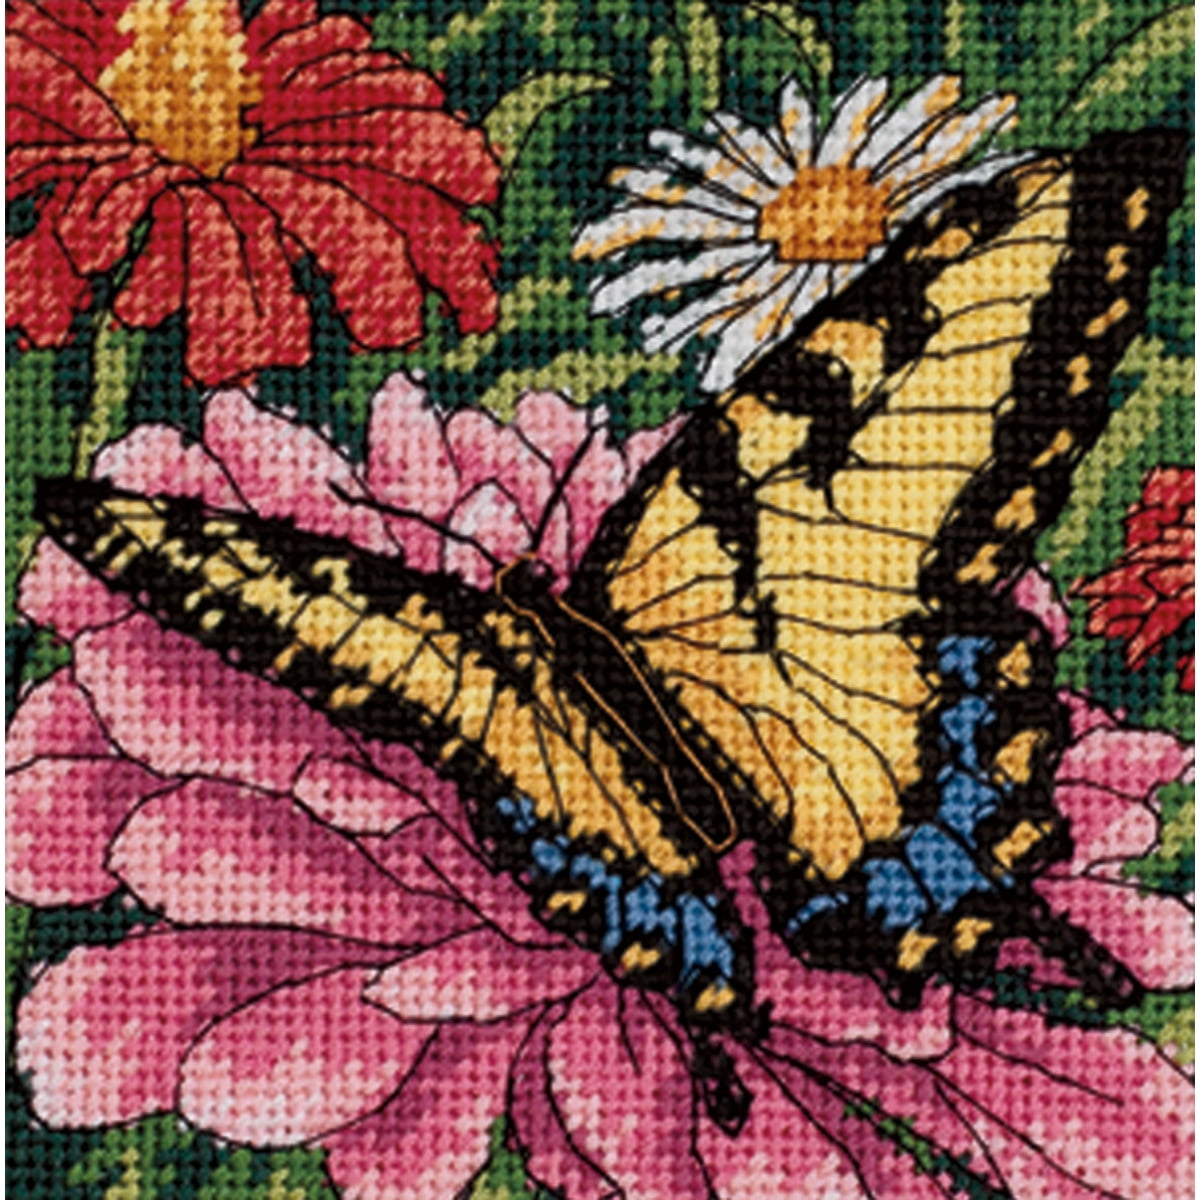 Dimensions, Art, Dimensions Needlepoint Kit New In Packaging Butterfly  Duo 5x5